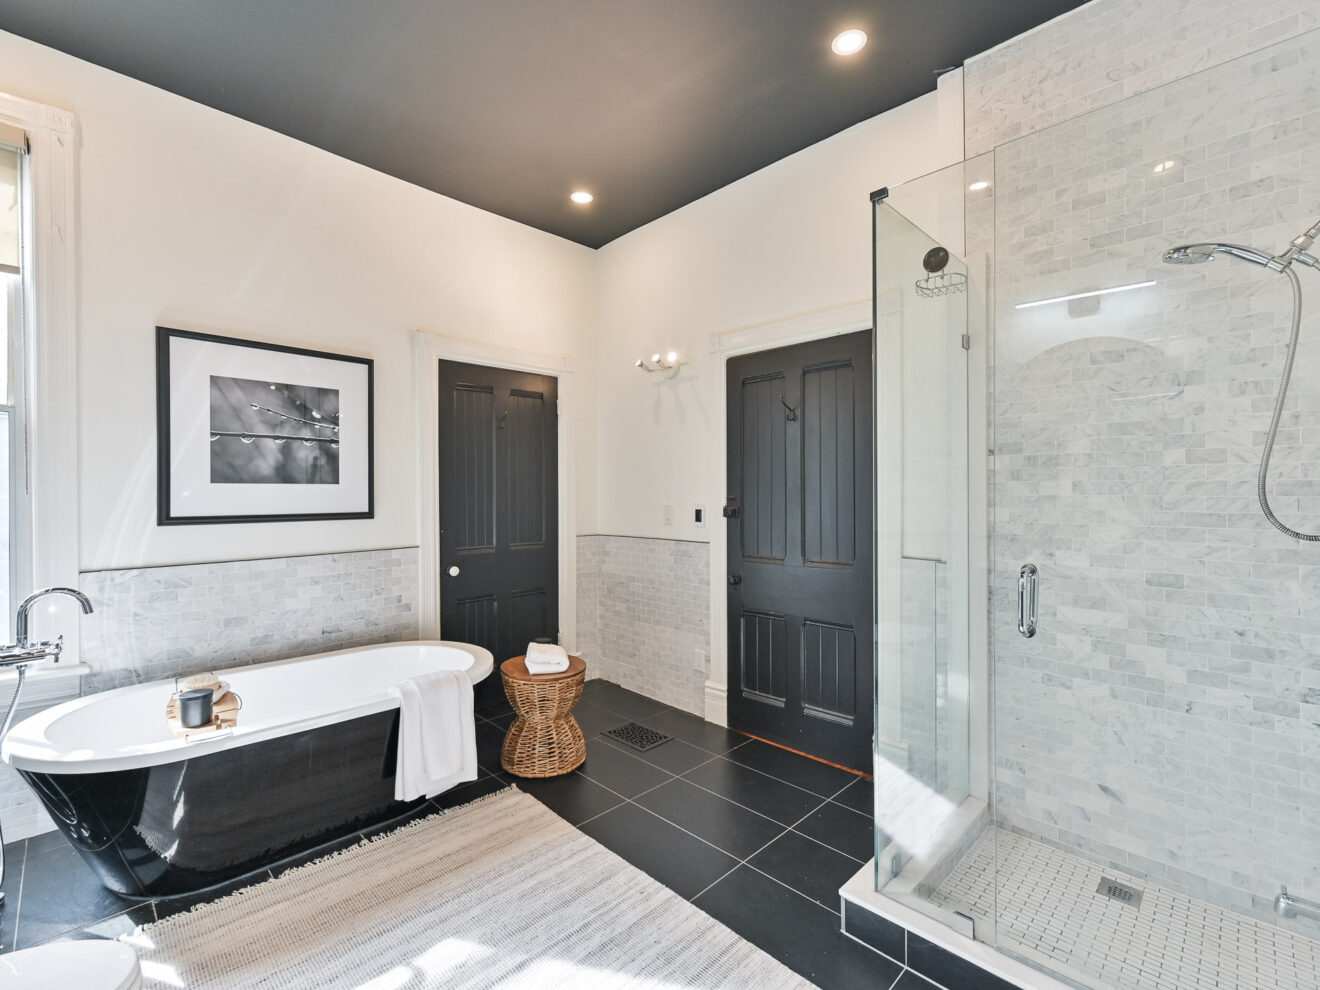 Master bathroom of 99 Willcocks Street featuring tub and glass-door shower